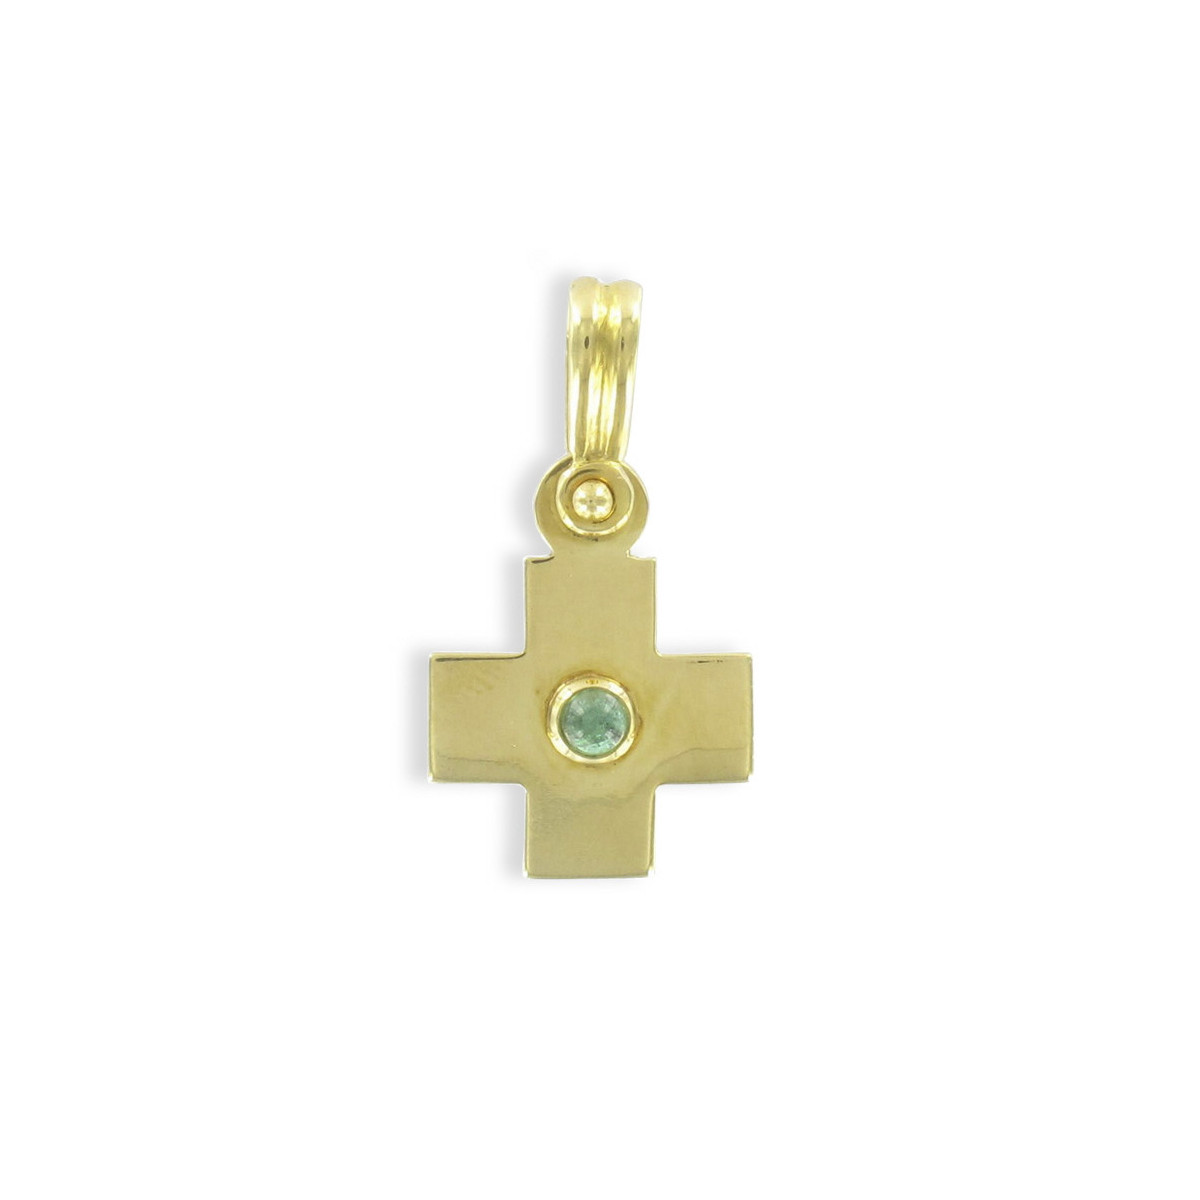 GOLD GREEK CROSS WITH CENTRAL CABOCHON EMERALD